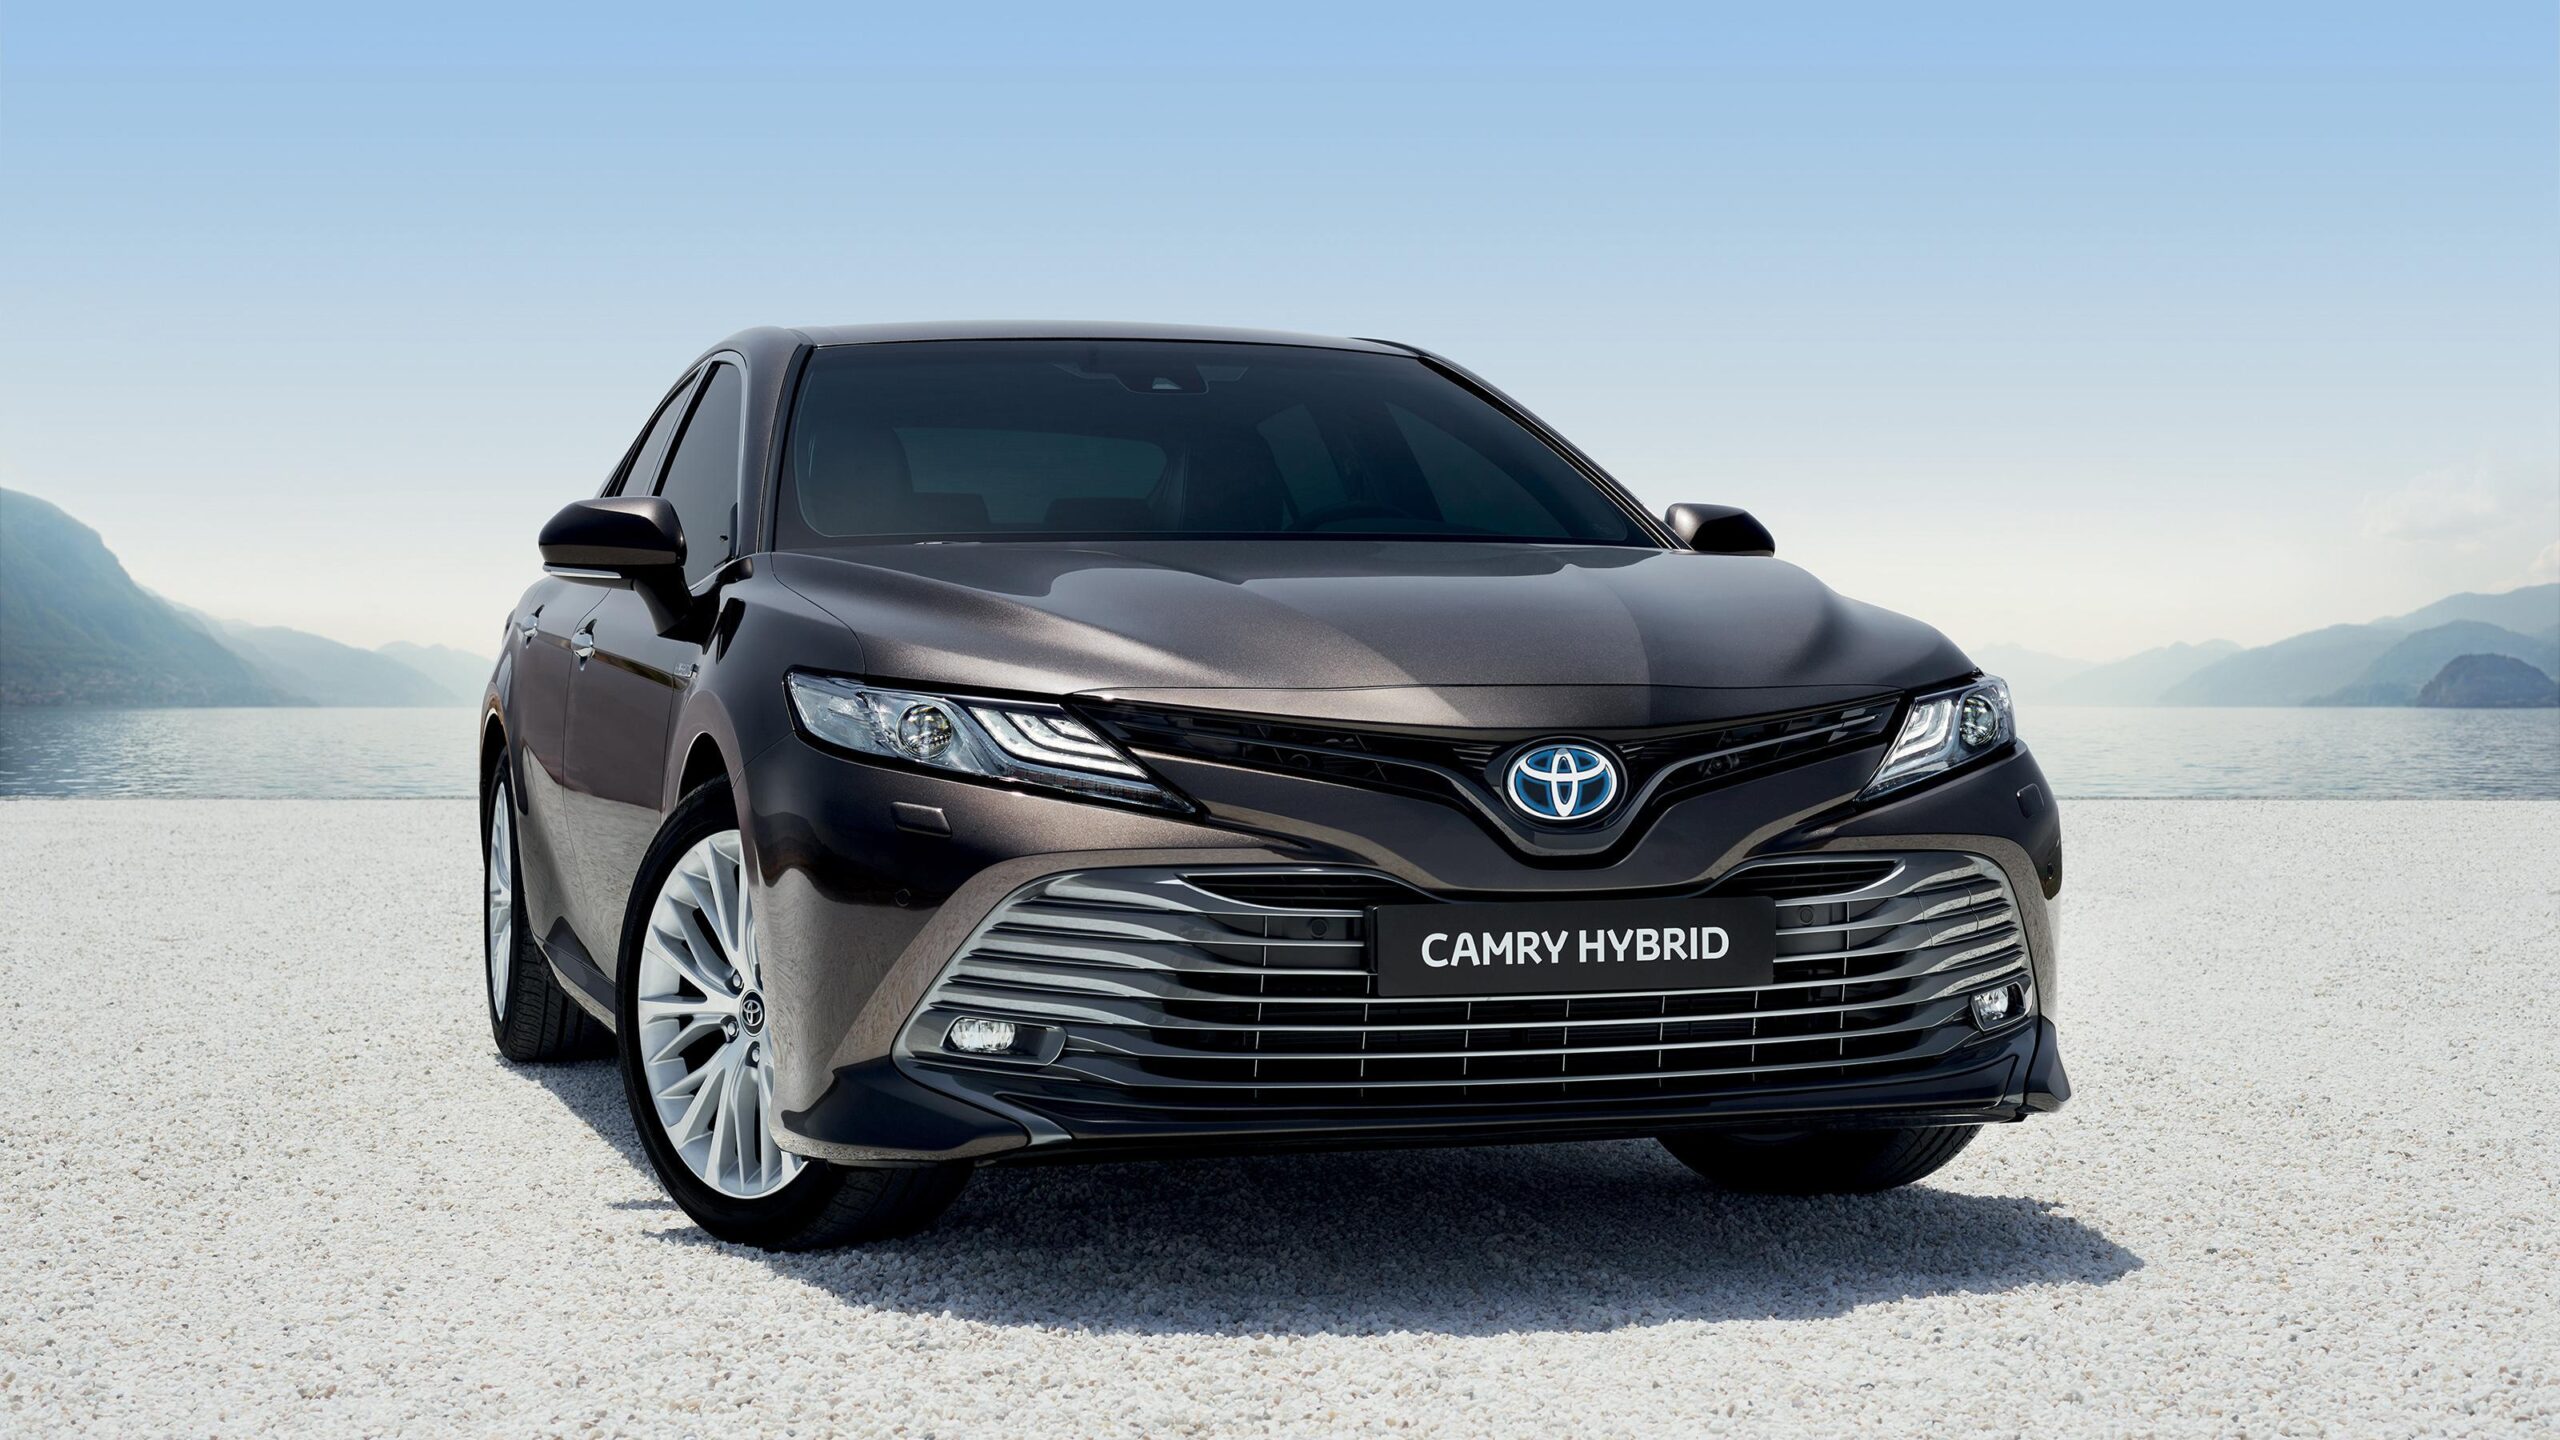 Toyota Camry Hybrid Wallpapers